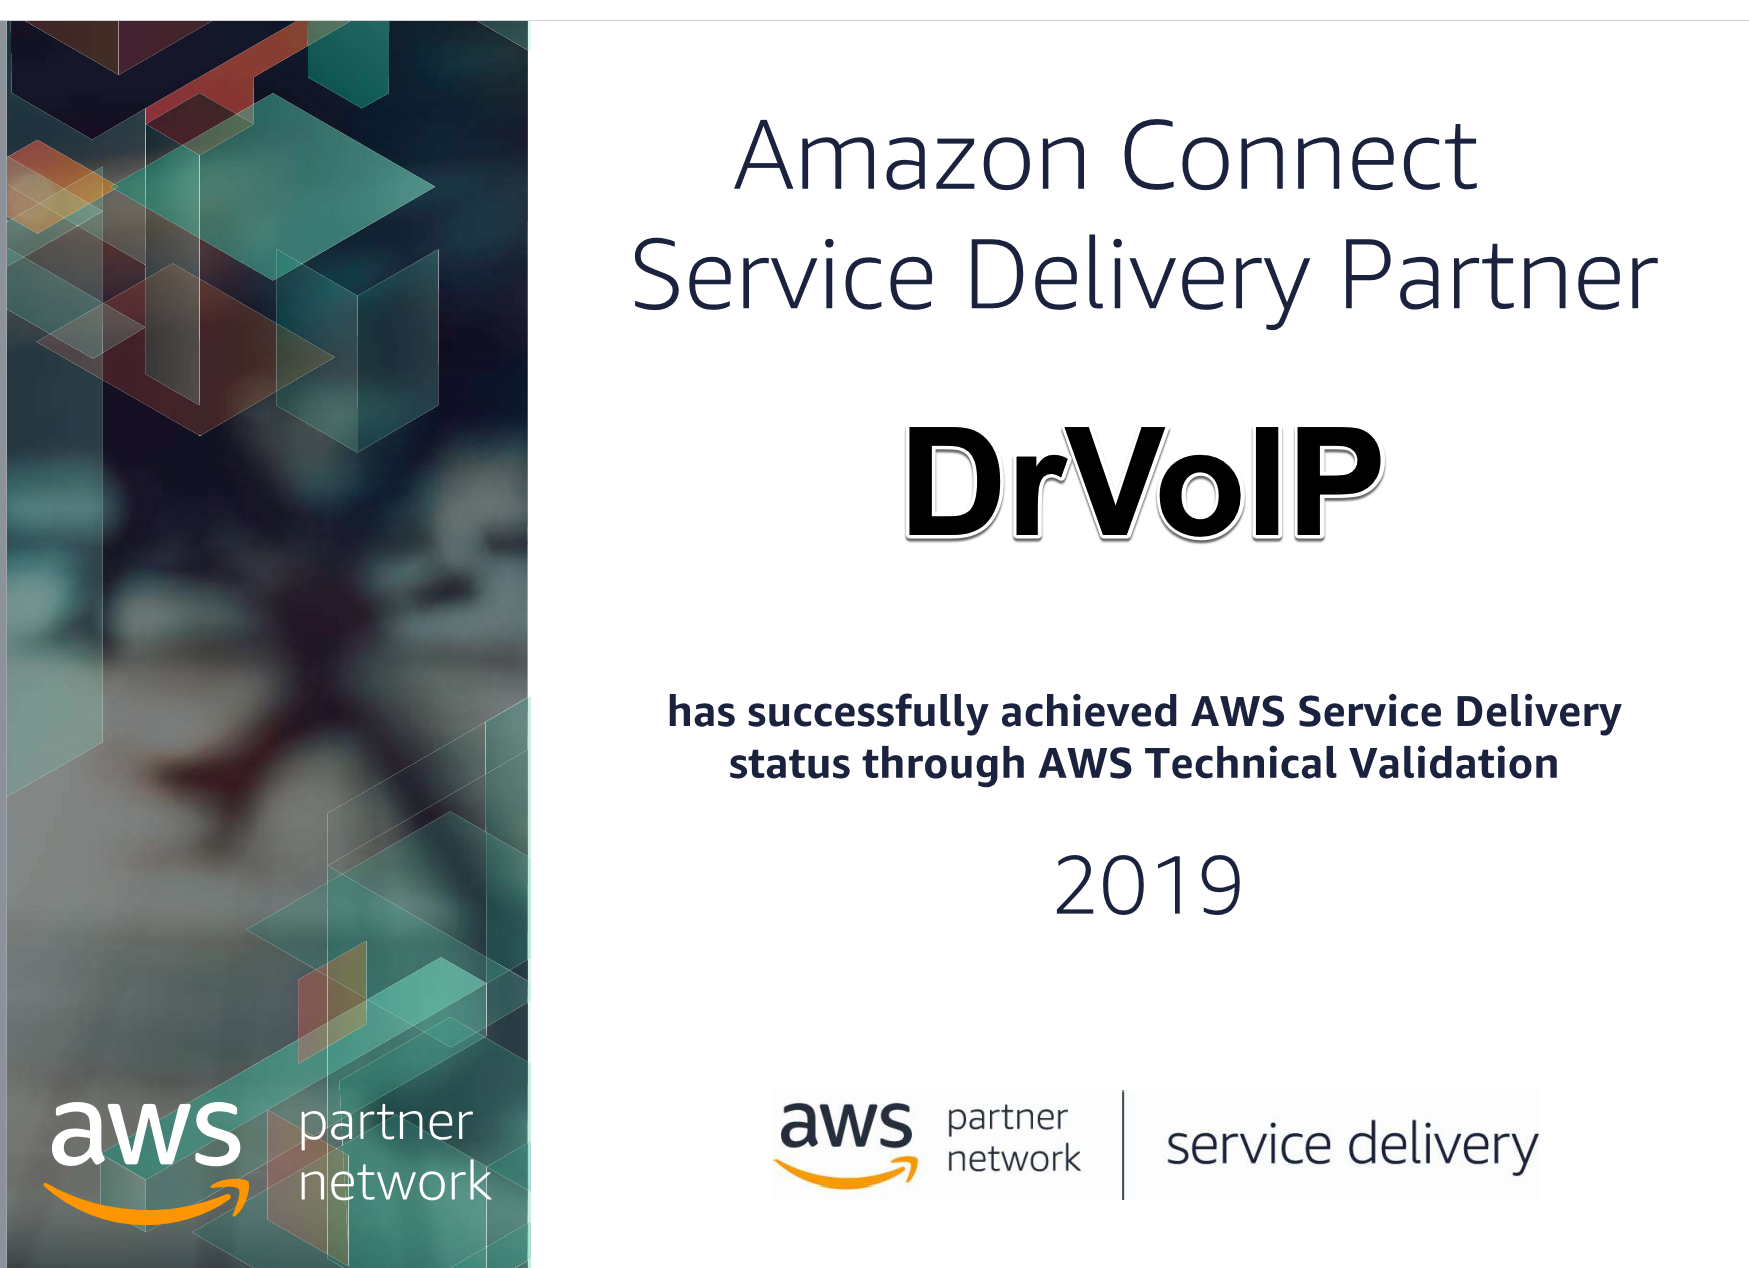 DrVoIP named Amazon Connect Service Delivery Partner